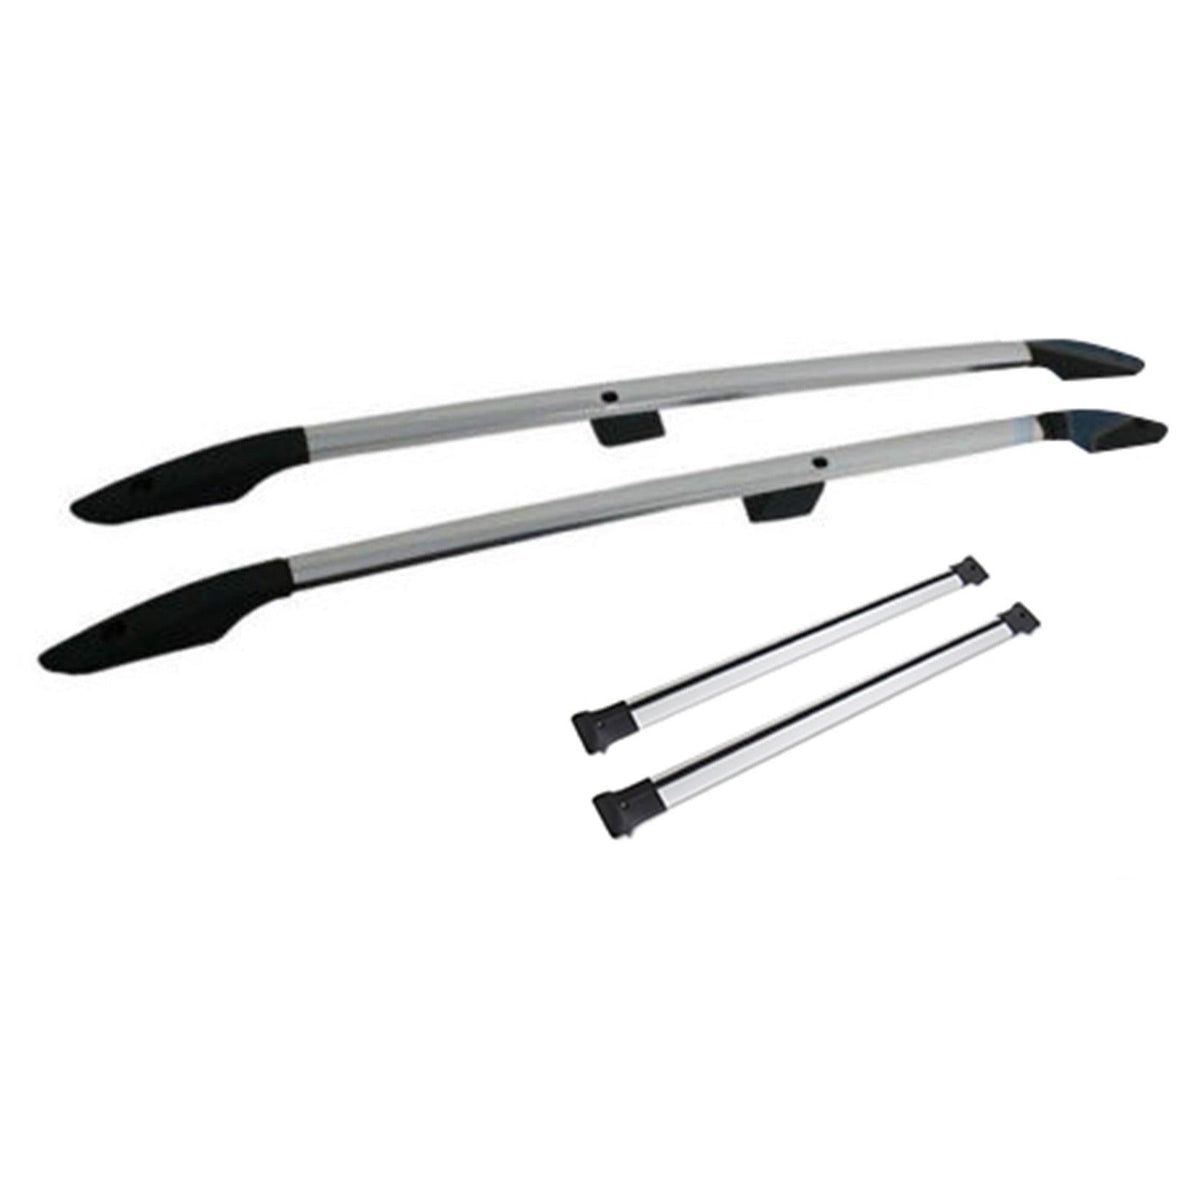 VW CADDY 2010 ON - ROOF RAILS AND CROSS BARS - SET - SILVER - Storm Xccessories2